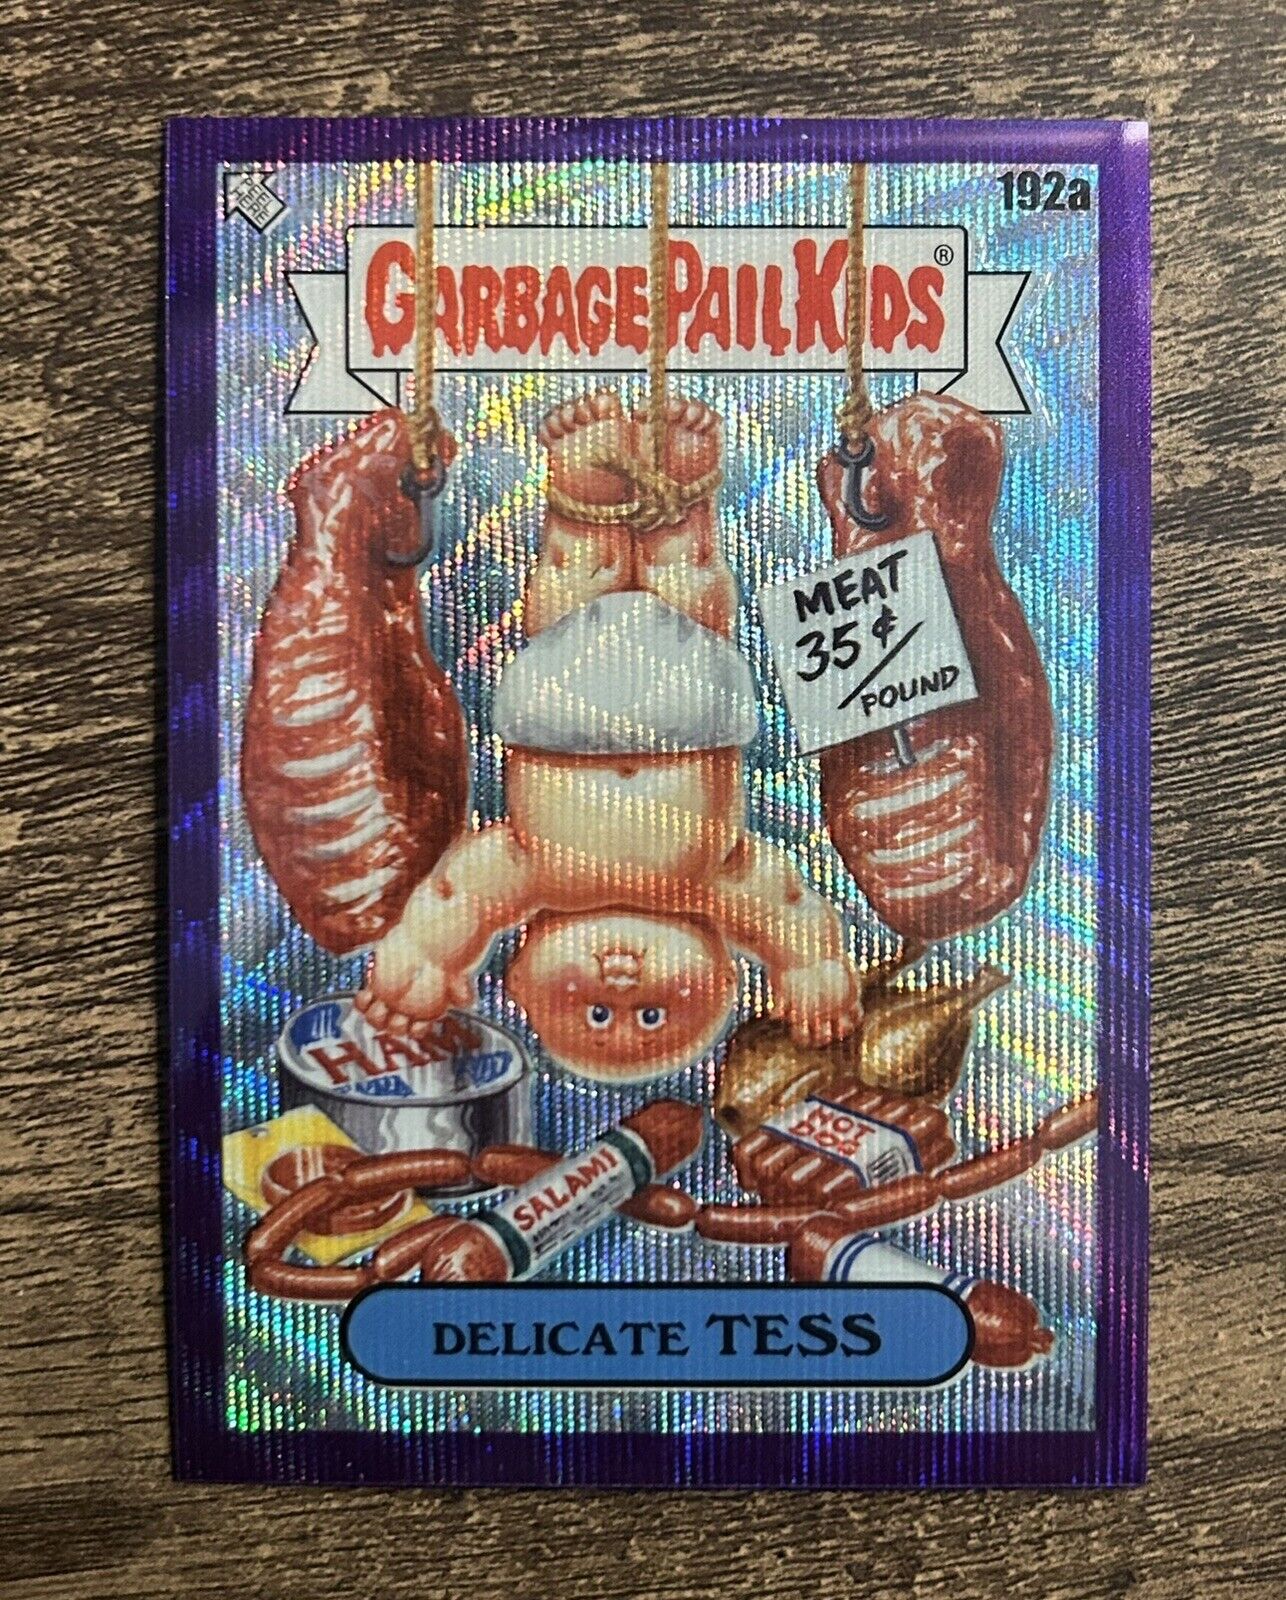 2022 Topps Garbage Pail Kids Chrome Purple Wave Refractor/250 Delicate Tess 192a